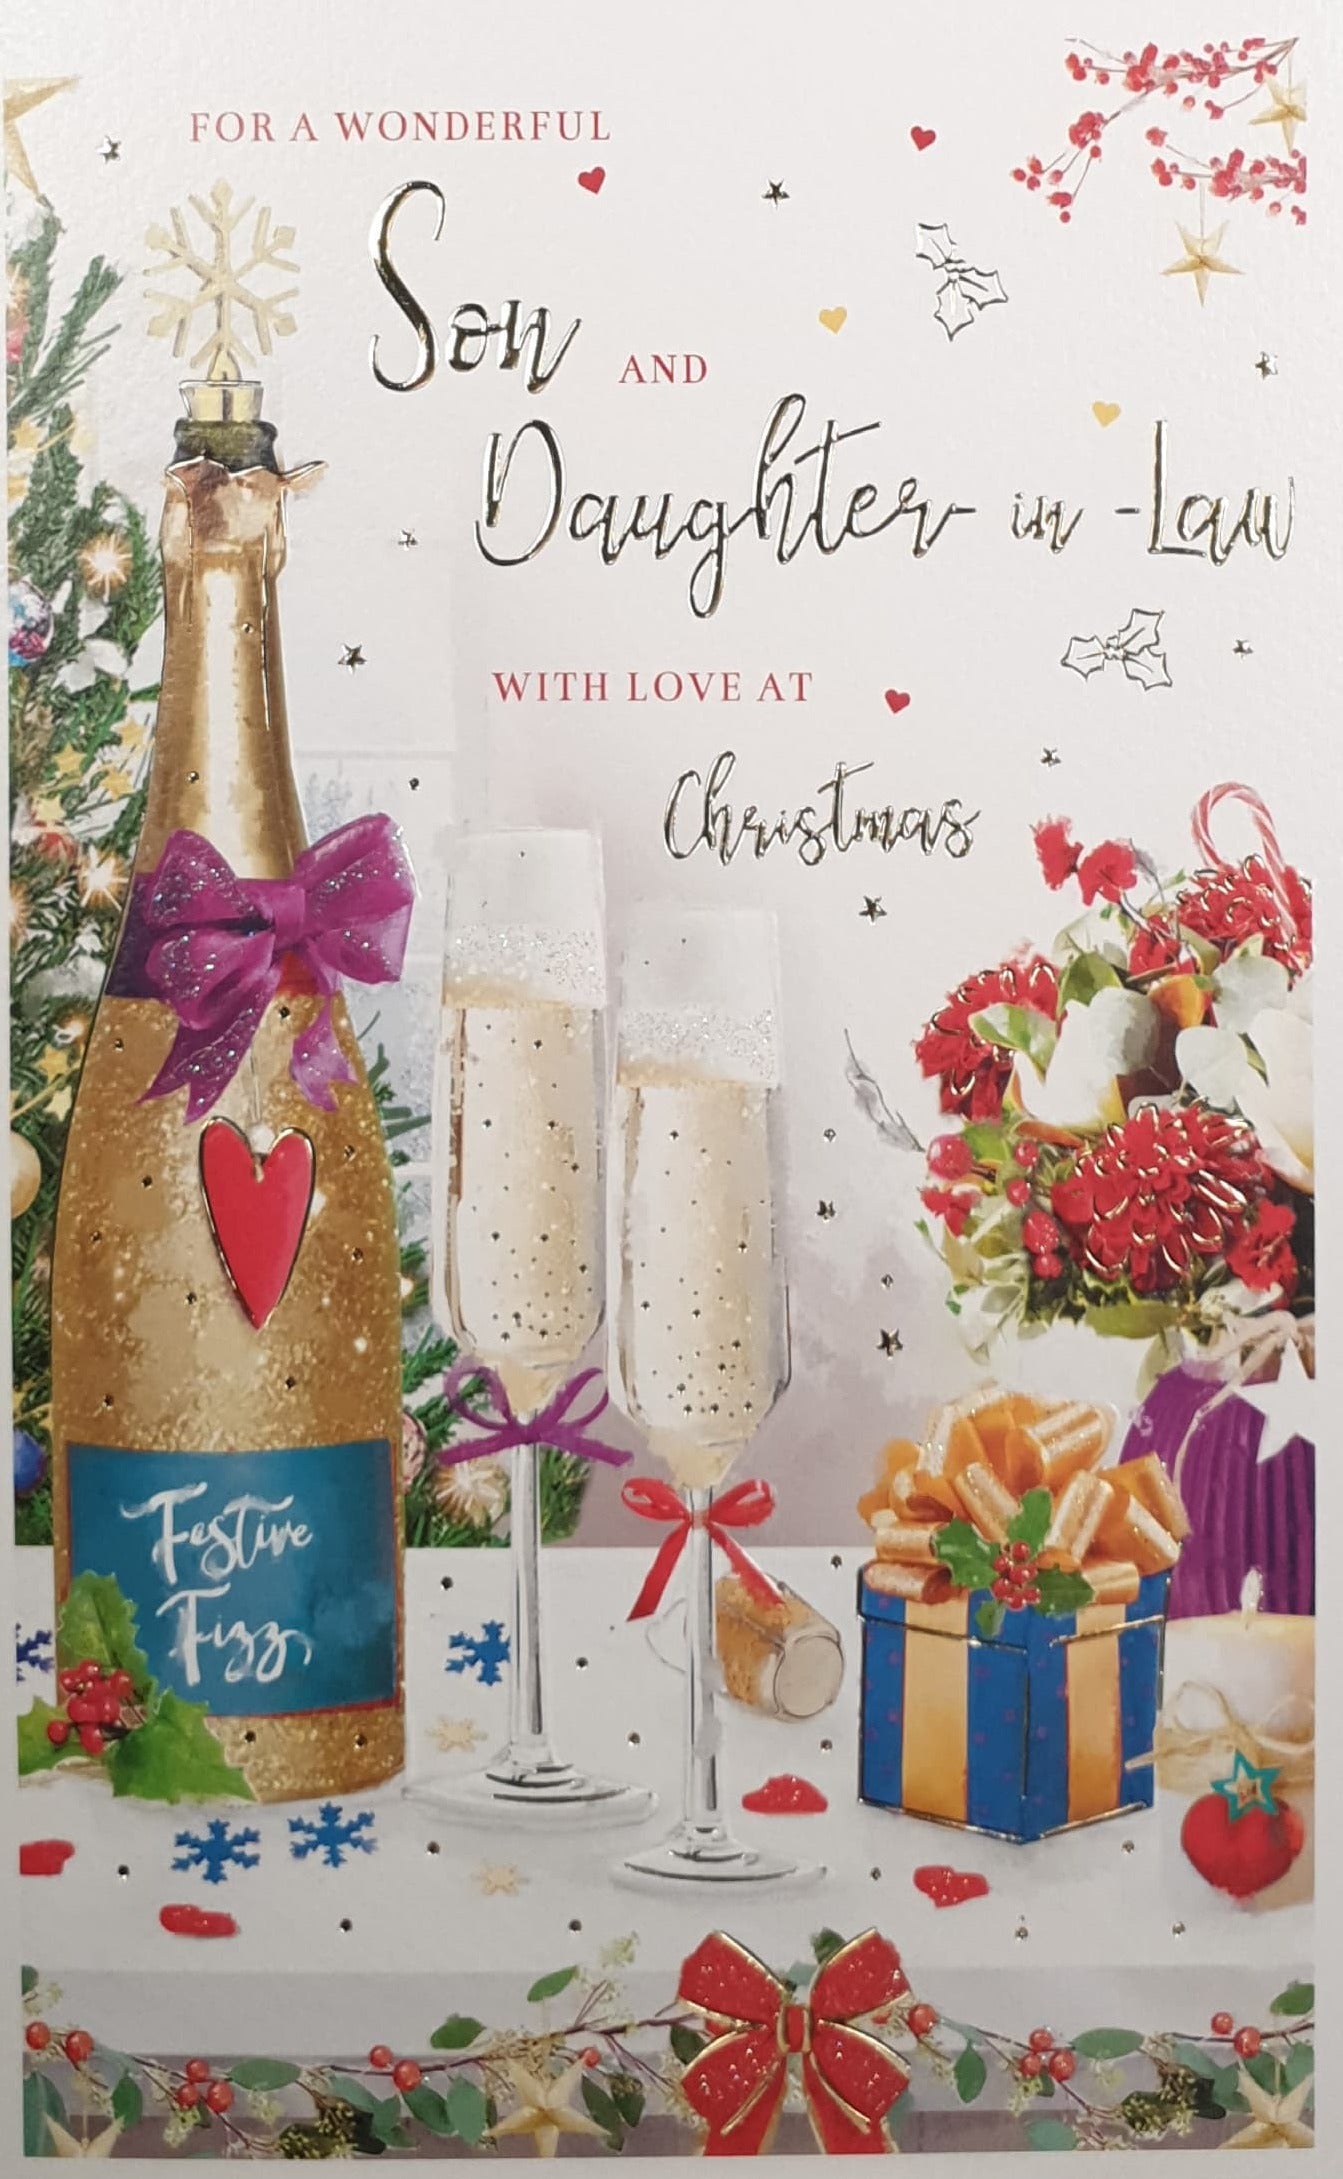 Son & Daughter in Law Christmas Card - Champagne, Ribbons & Gifts on Festive Table